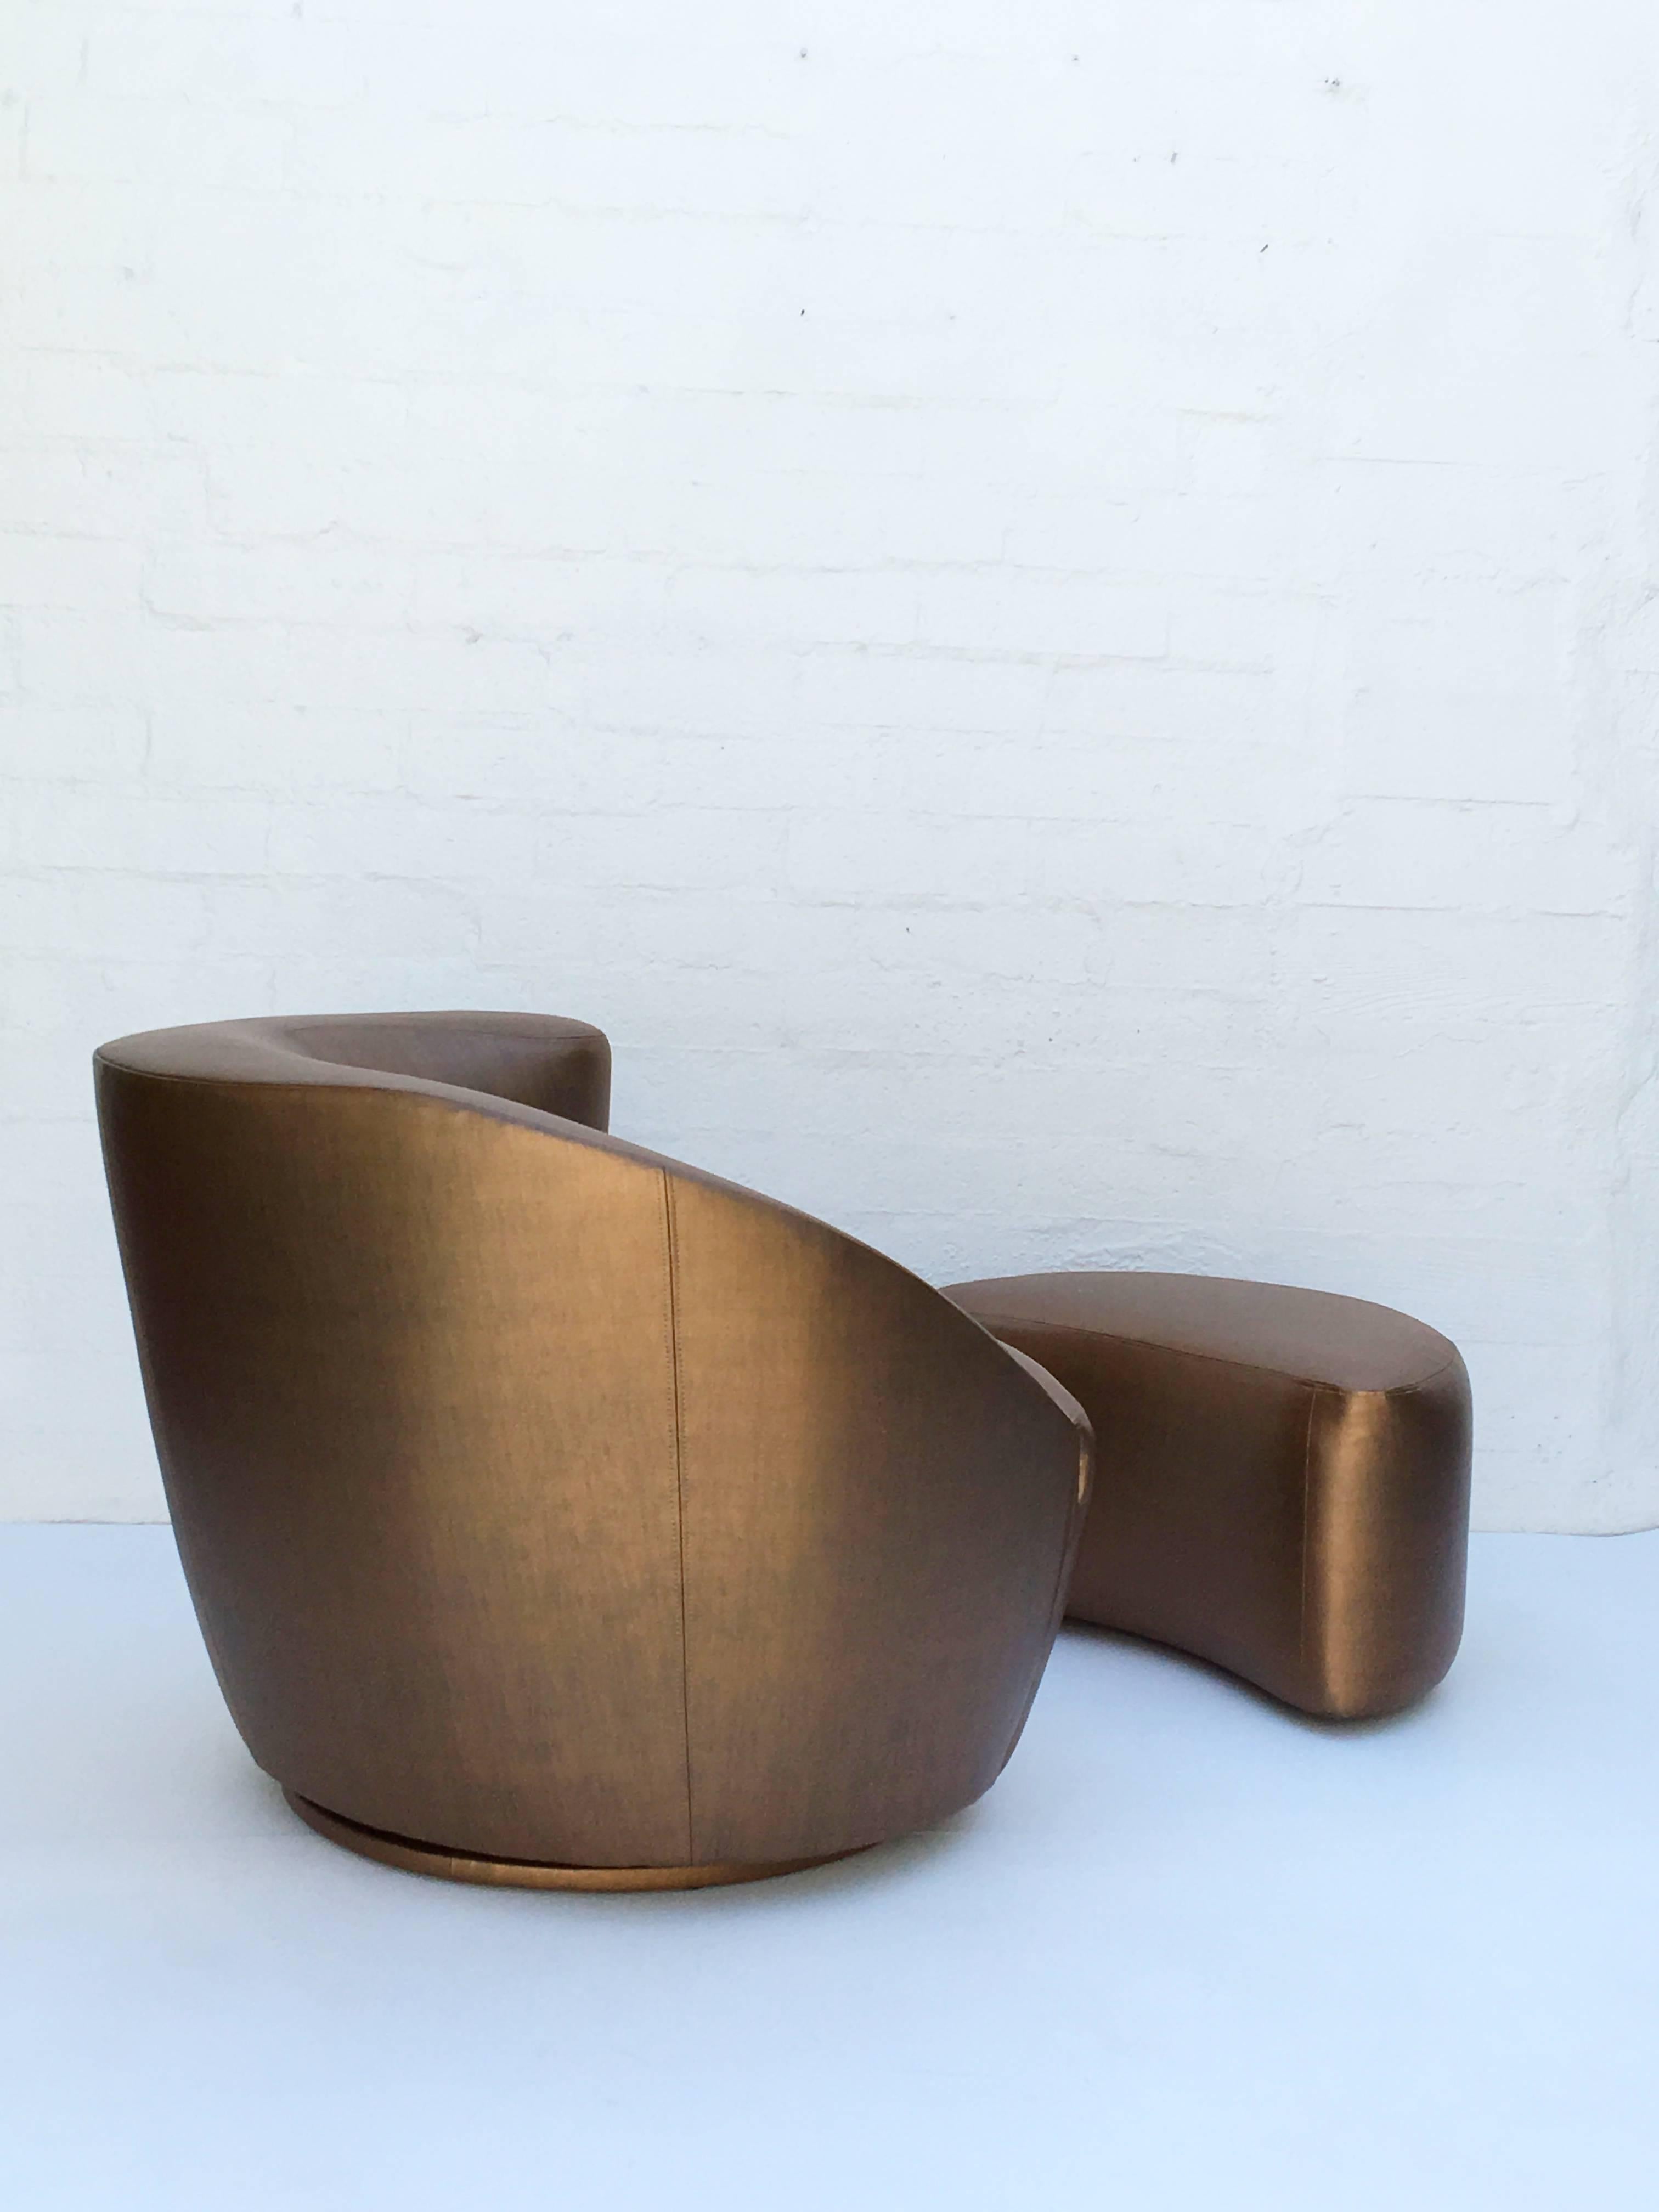 American Pair of Swivel Lounge Chairs and Ottomans by Vladimir Kagan 1927-2016